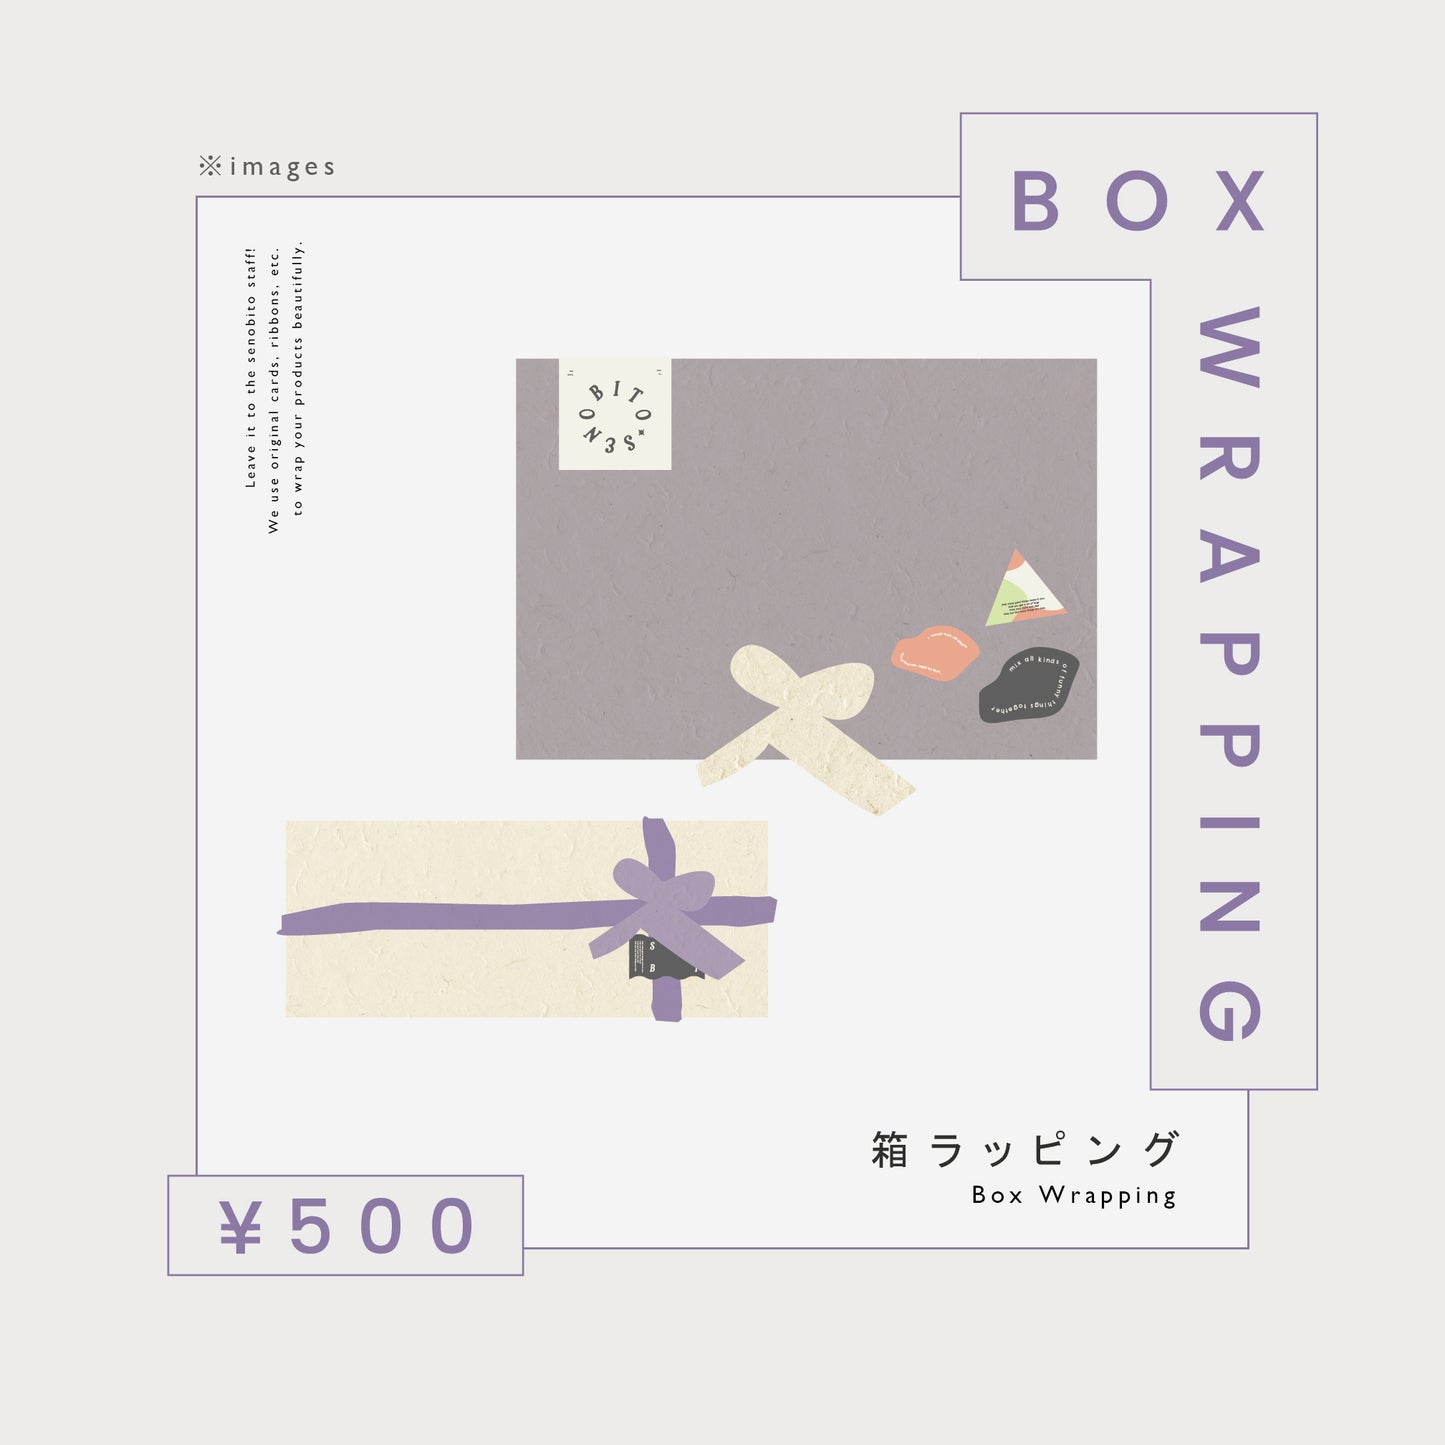 BOX WRAPPING - 箱ラッピング